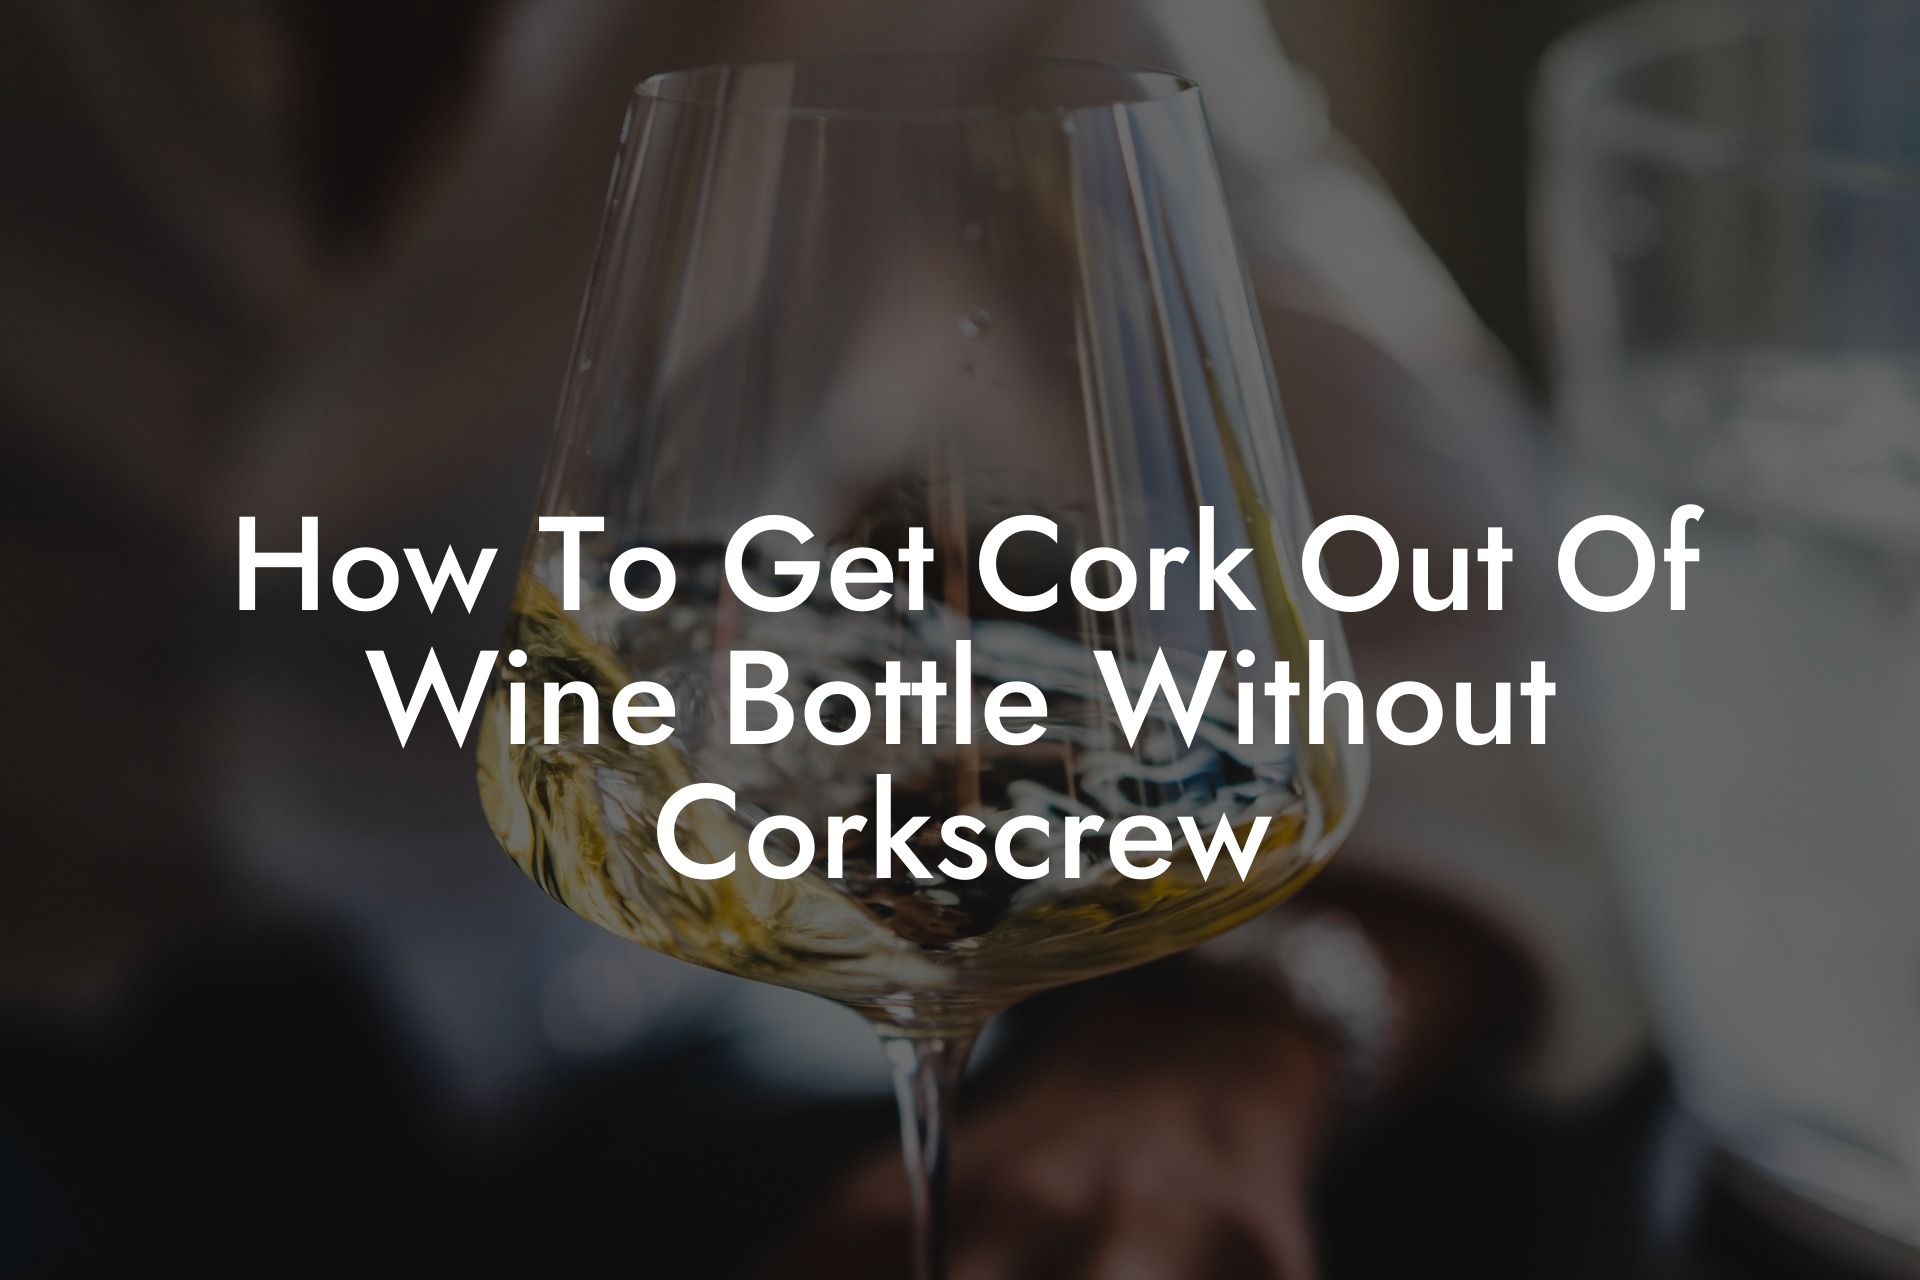 How To Get Cork Out Of Wine Bottle Without Corkscrew